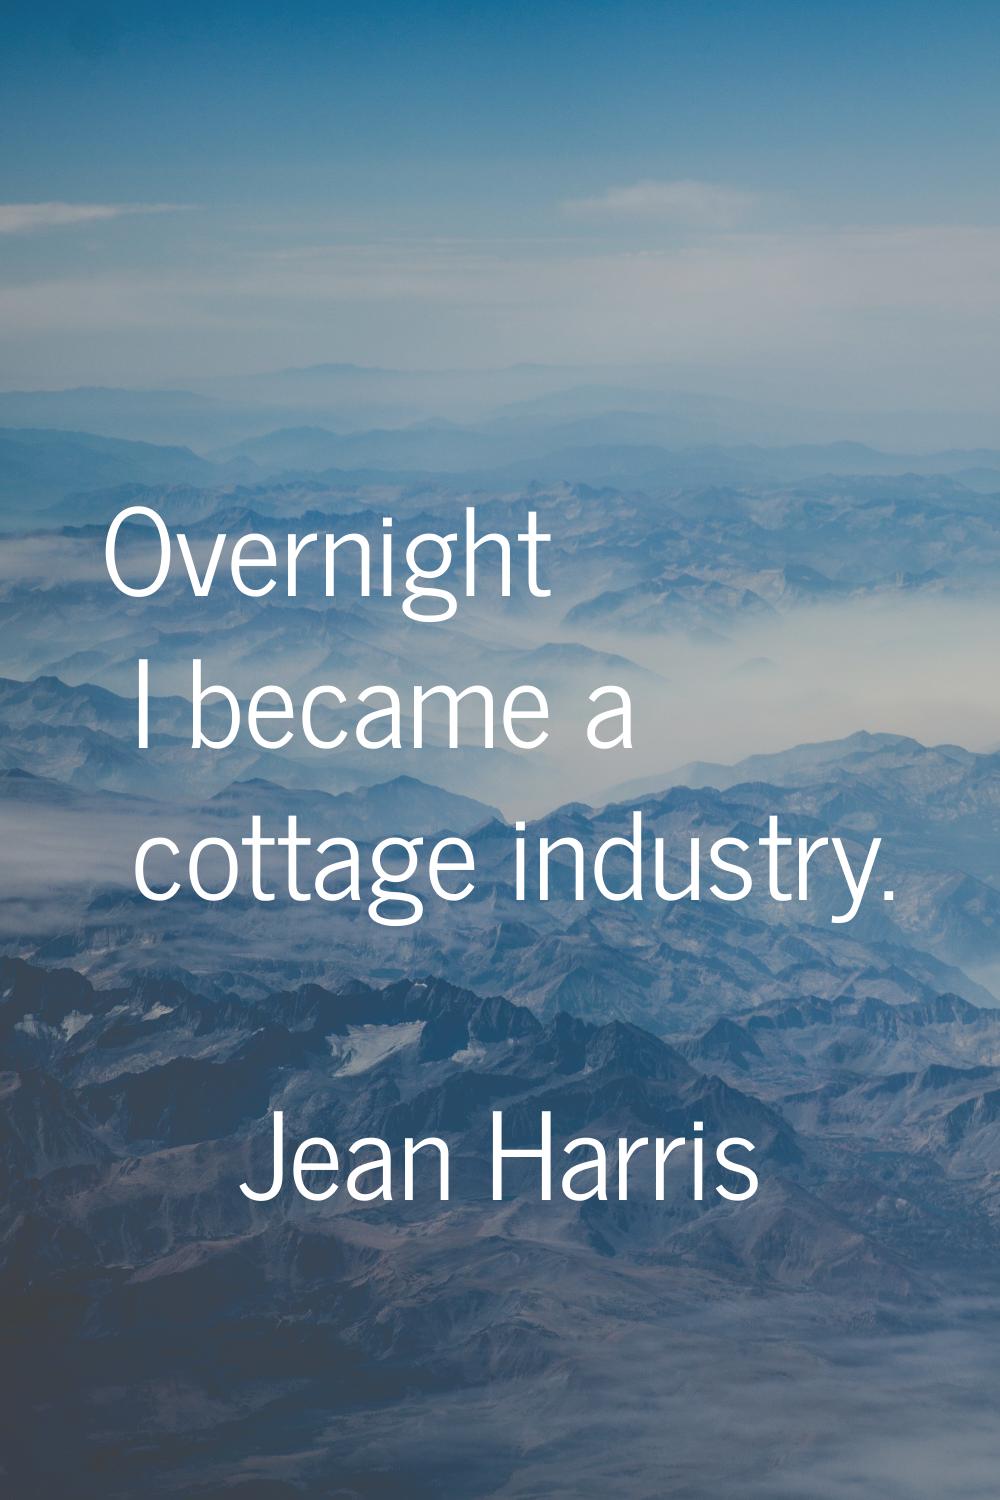 Overnight I became a cottage industry.